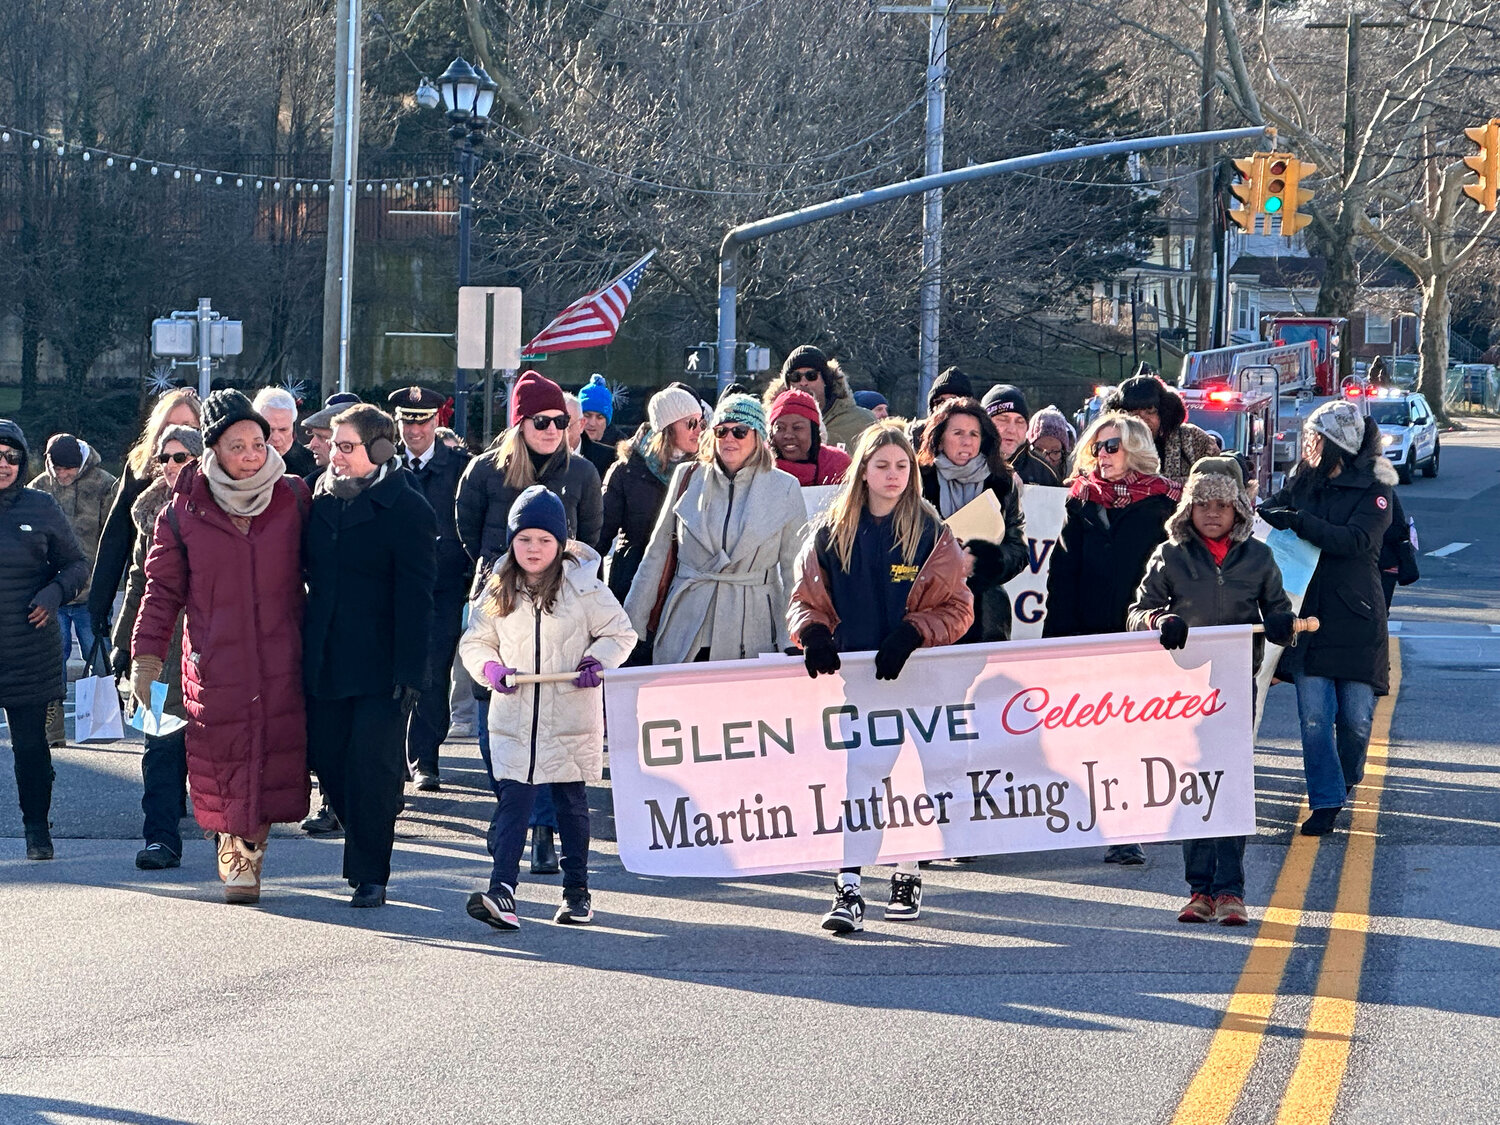 Despite the freezing temperatures, the Glen Cove community proudly marched in the city’s 40th celebration honoring of Rev. Dr. Martin Luther King Jr.